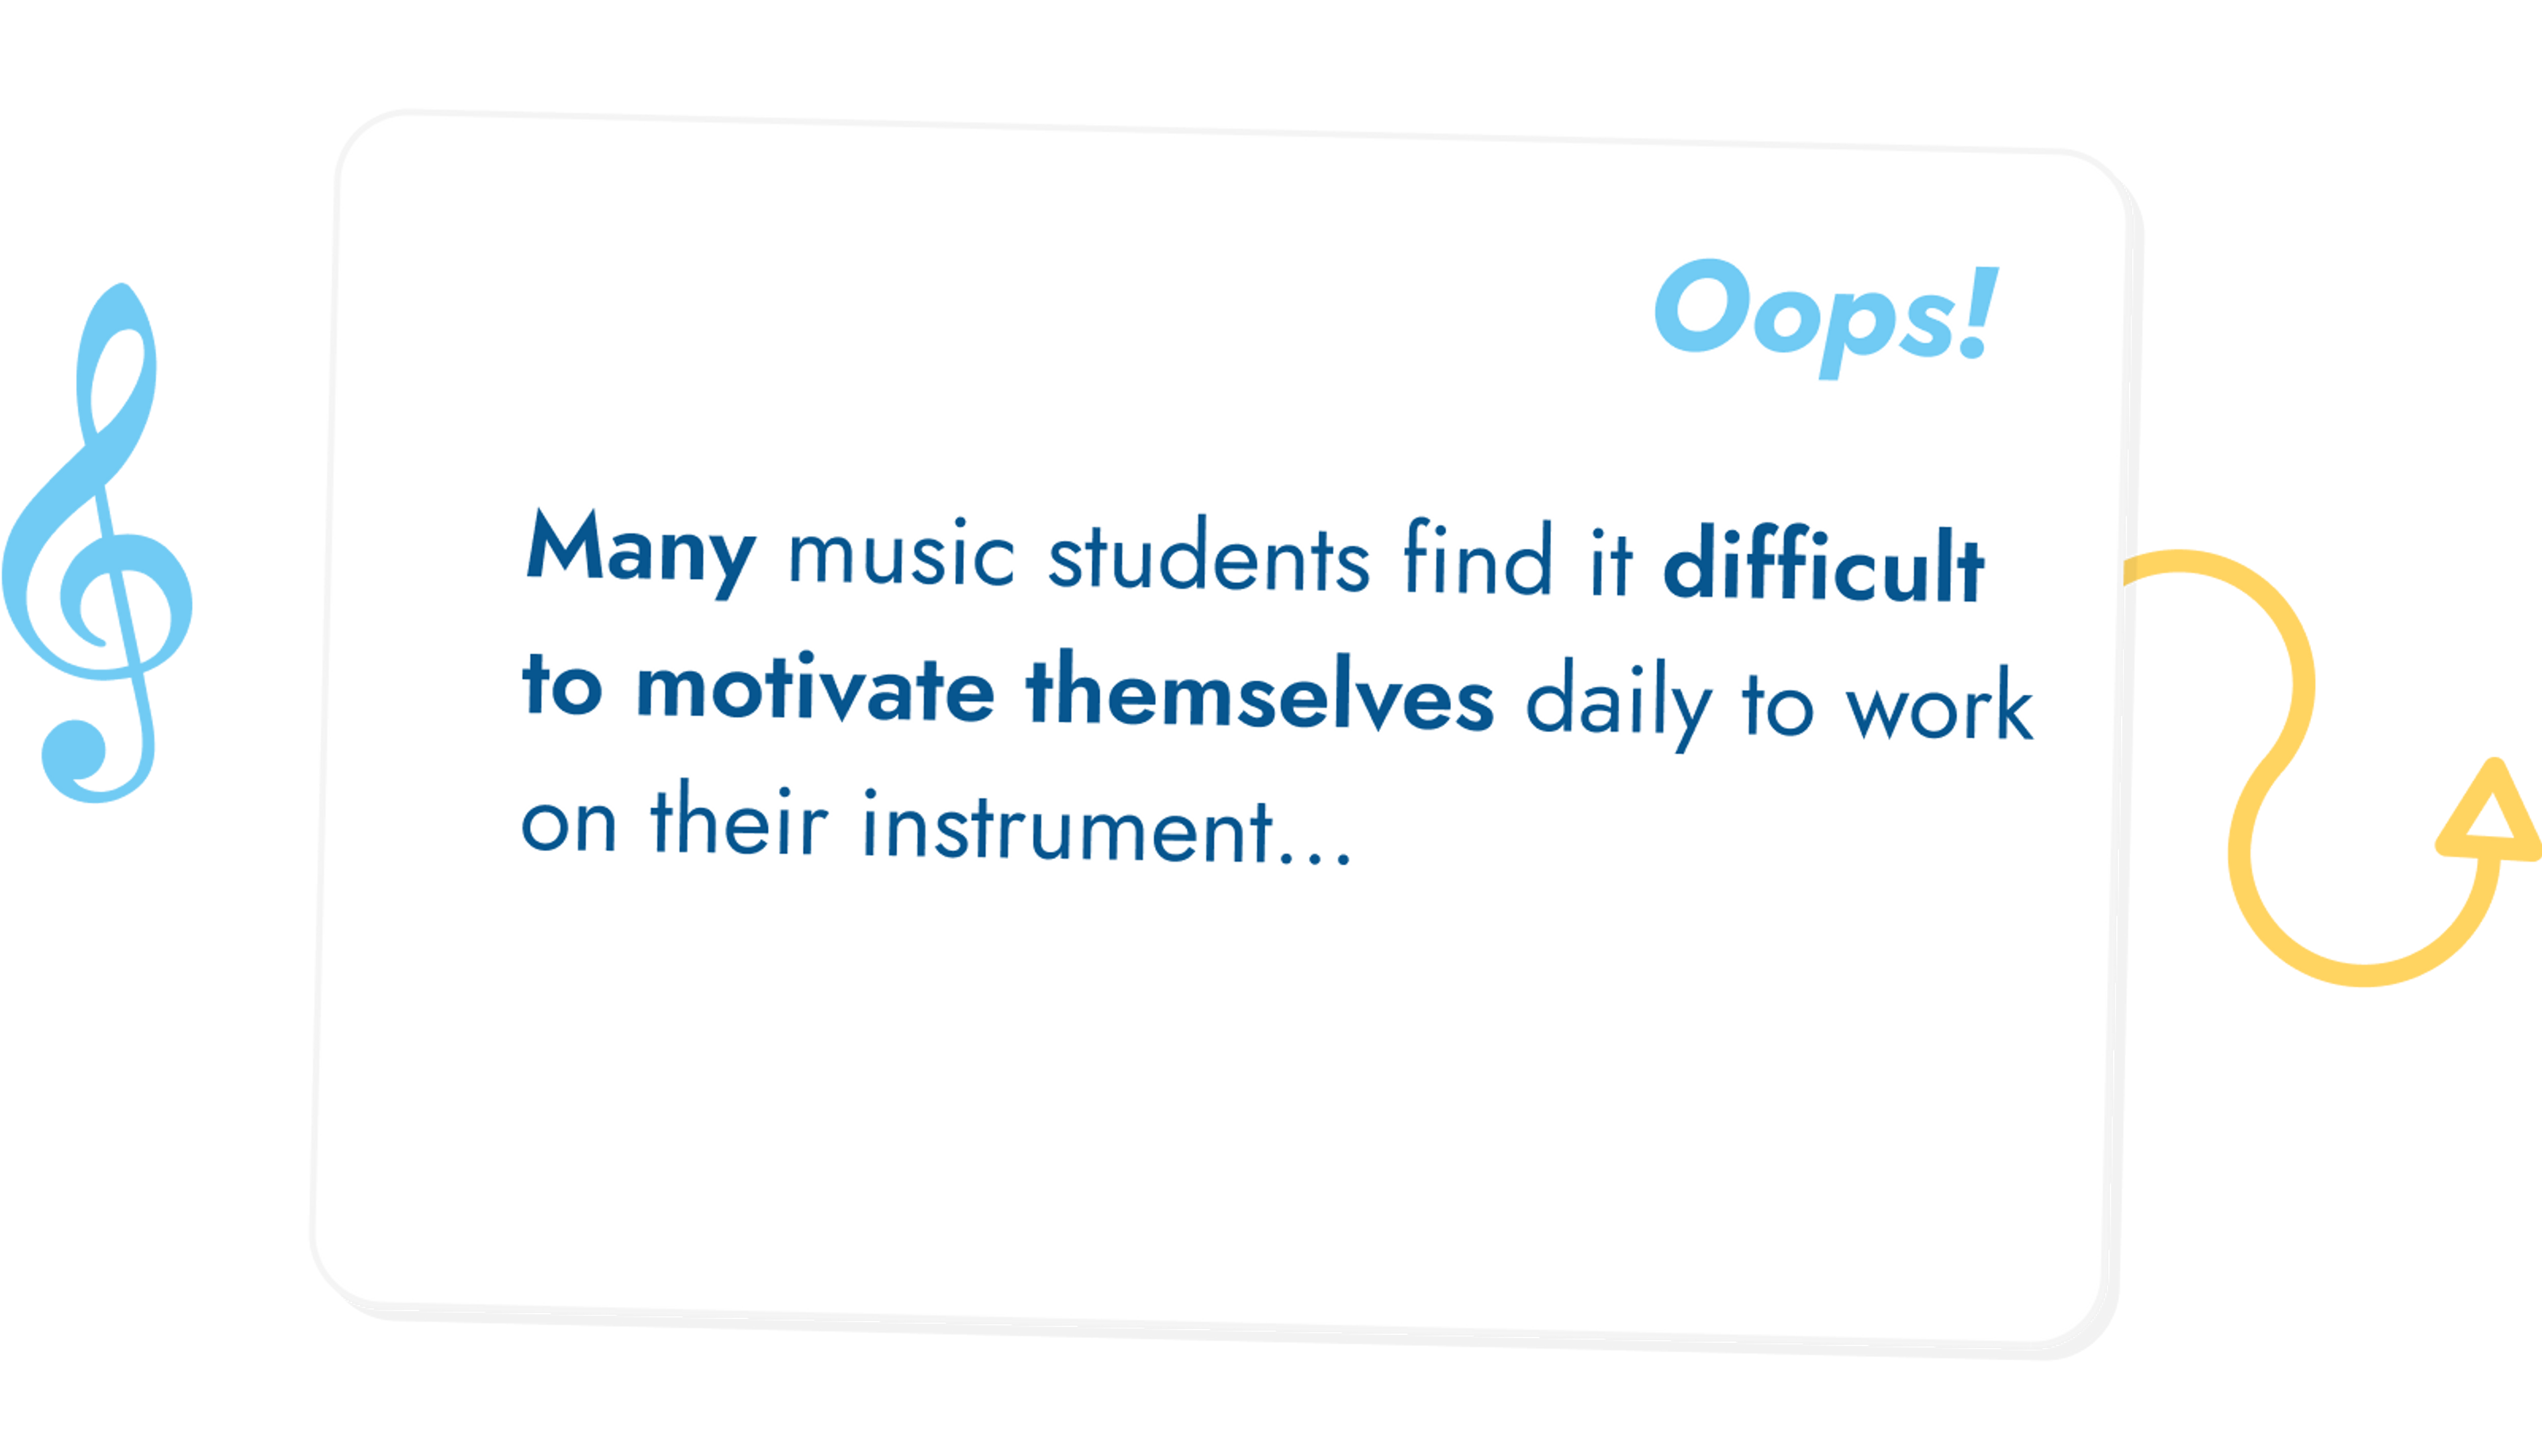 Many music students find it difficult to motivate themselves daily to work on their instrument...